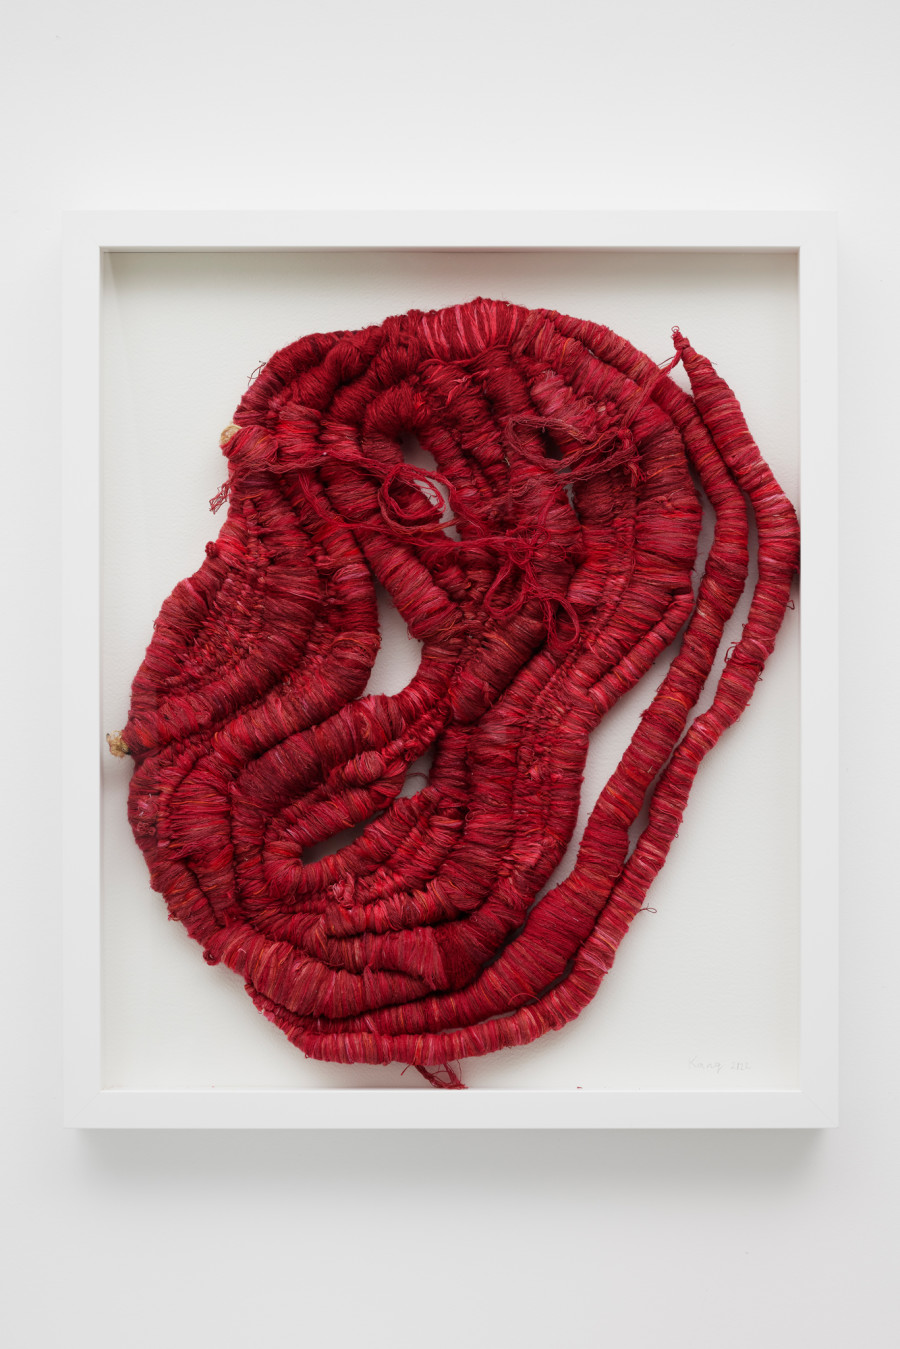 Soojin Kang, Untitled (lump), 2022, Silk, jute, cotton, linen and wire, framed, 64 x 54 cm (frame). Courtesy: the artist and Ben Hunter, London. Photo: Hannes Heinzer